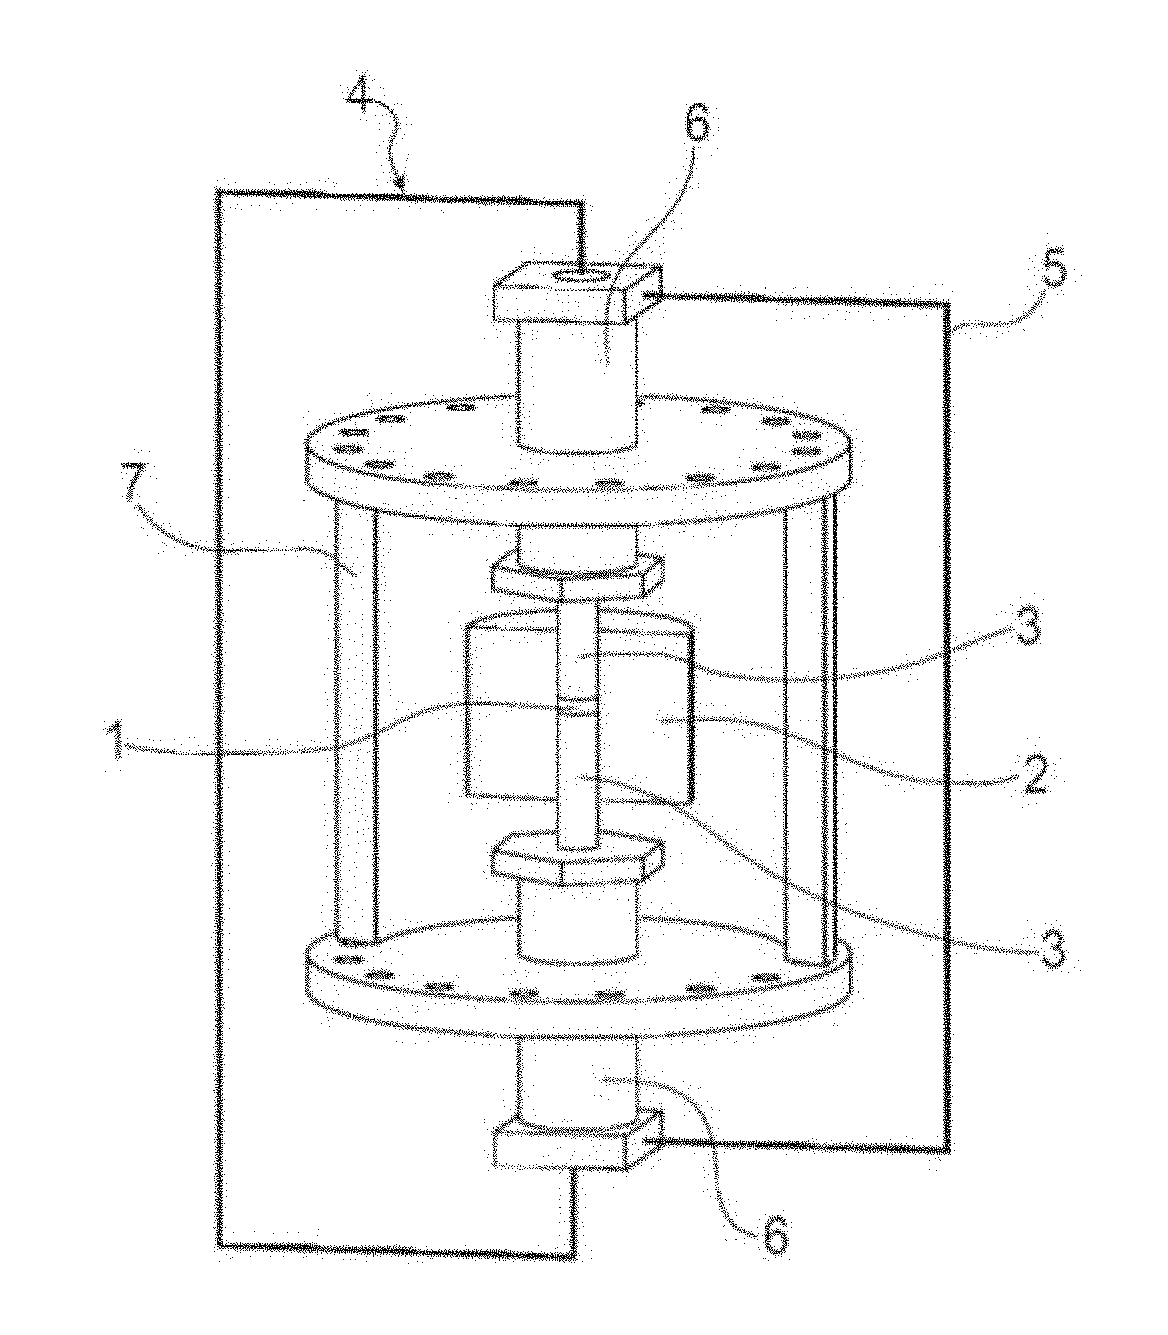 Method for preparing a material made from aluminosilicate and method for preparing a composite material having an aluminosilicate matrix